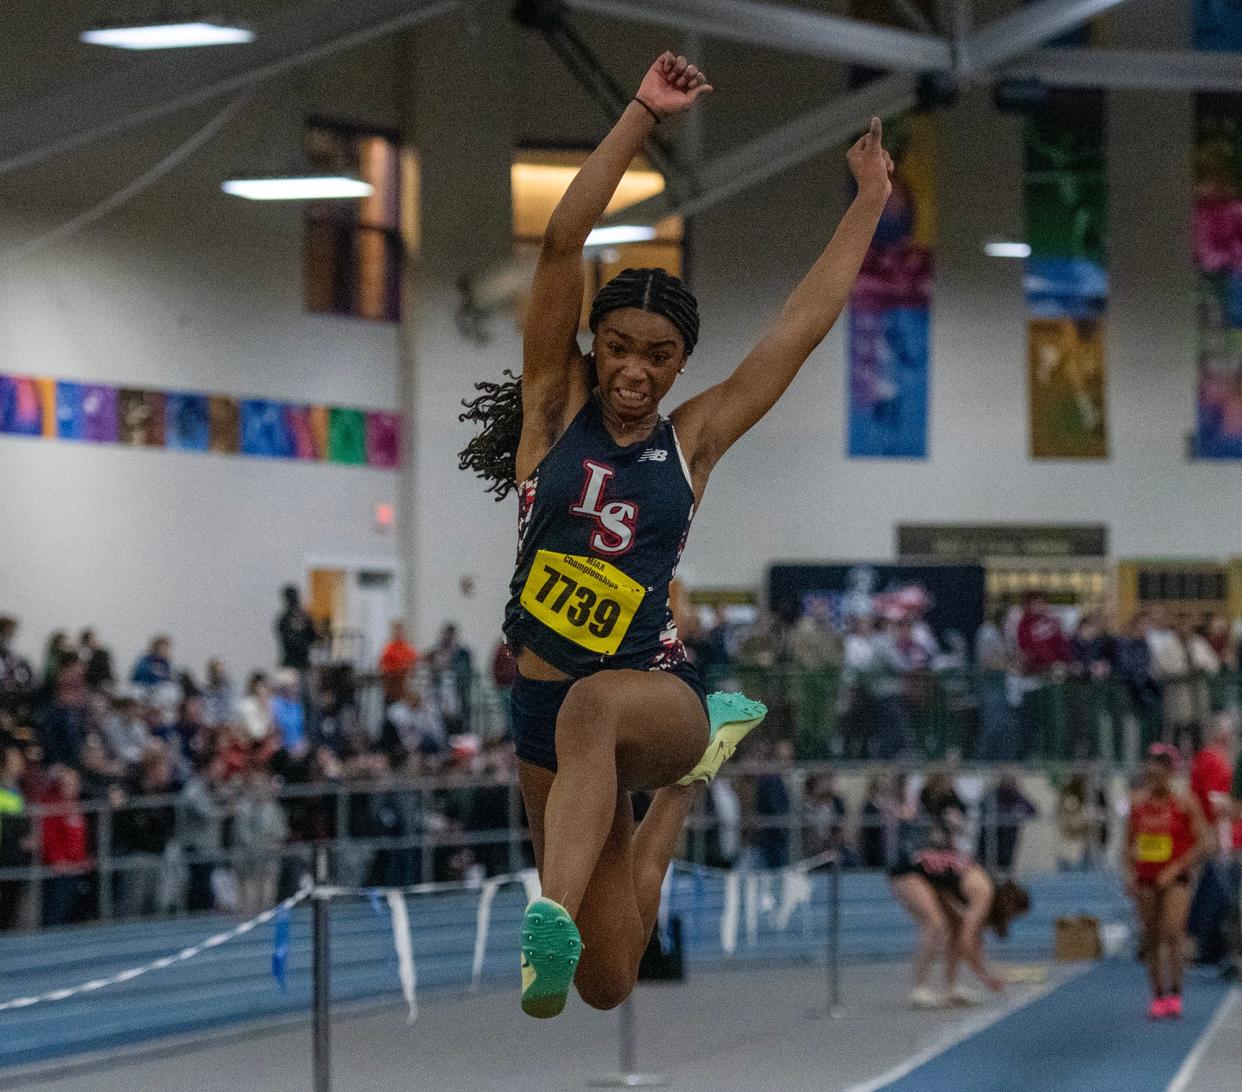 BOSTON - Lincoln-Sudbury’s Gabrielle Pierre jumps her way to a second place finish in the long jump during the indoor track and field championship Saturday at the Reggie Lewis Center.